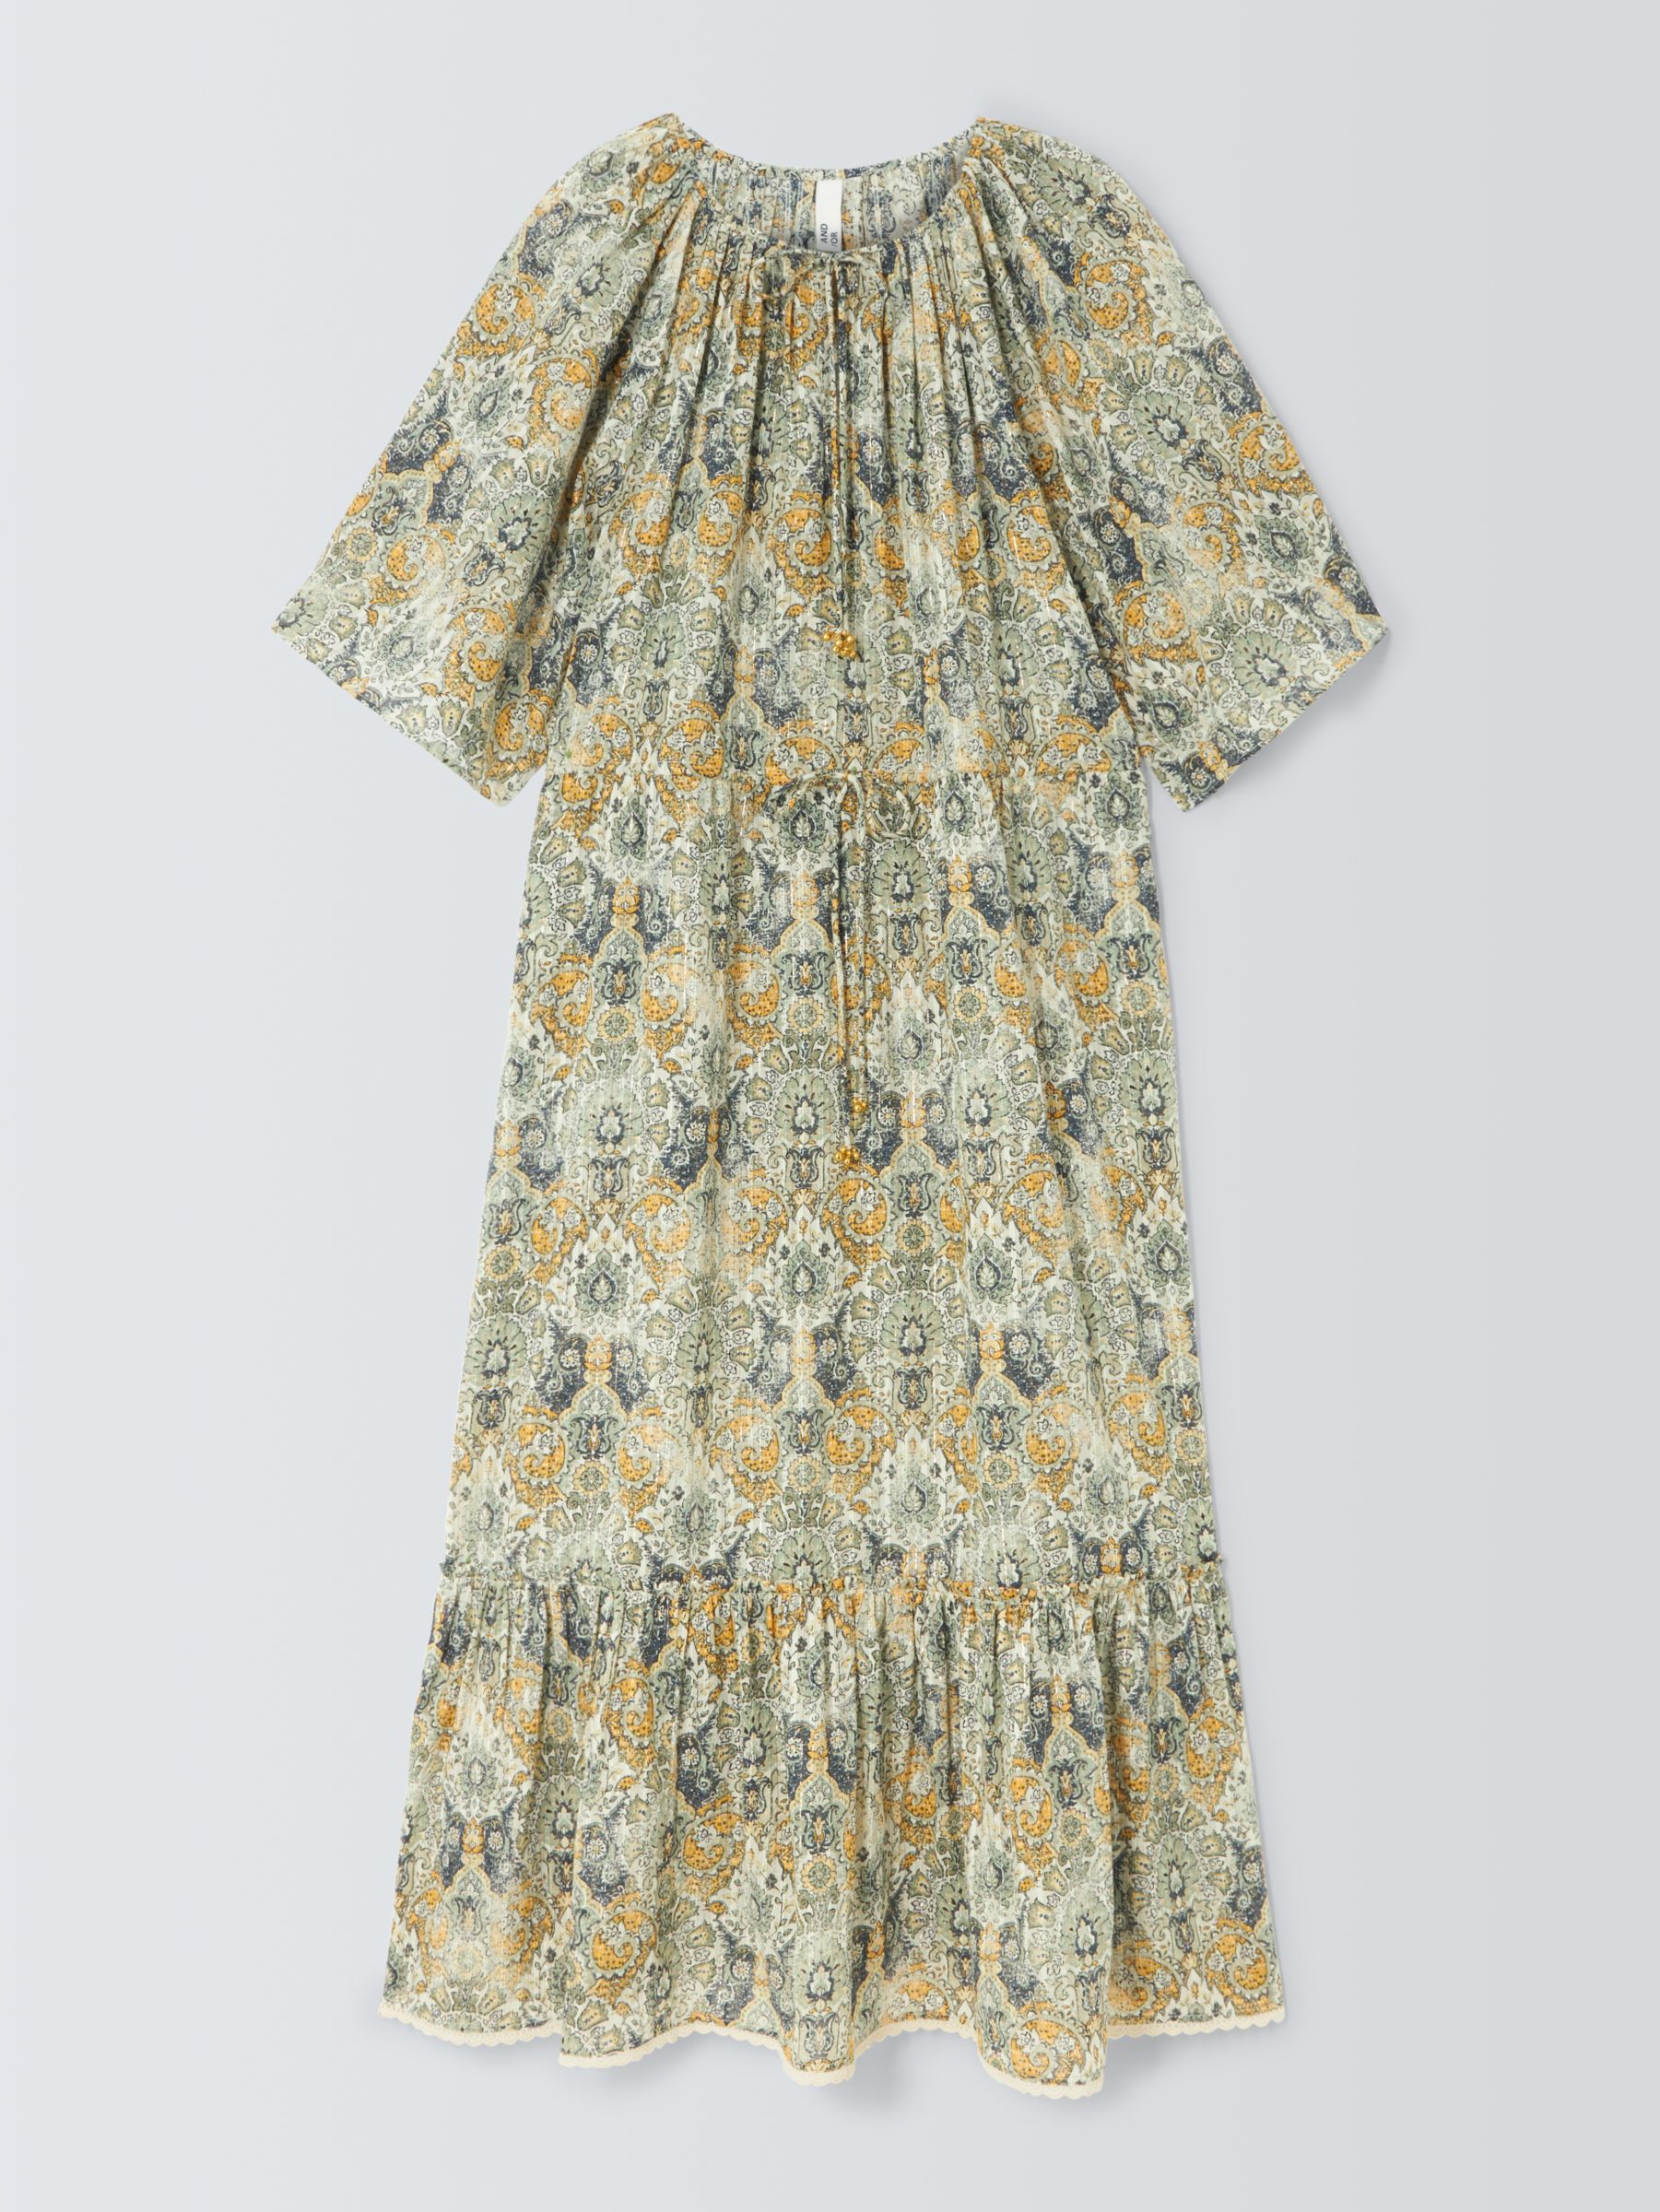 AND/OR Harlow Paisley Dress, Multi, 12